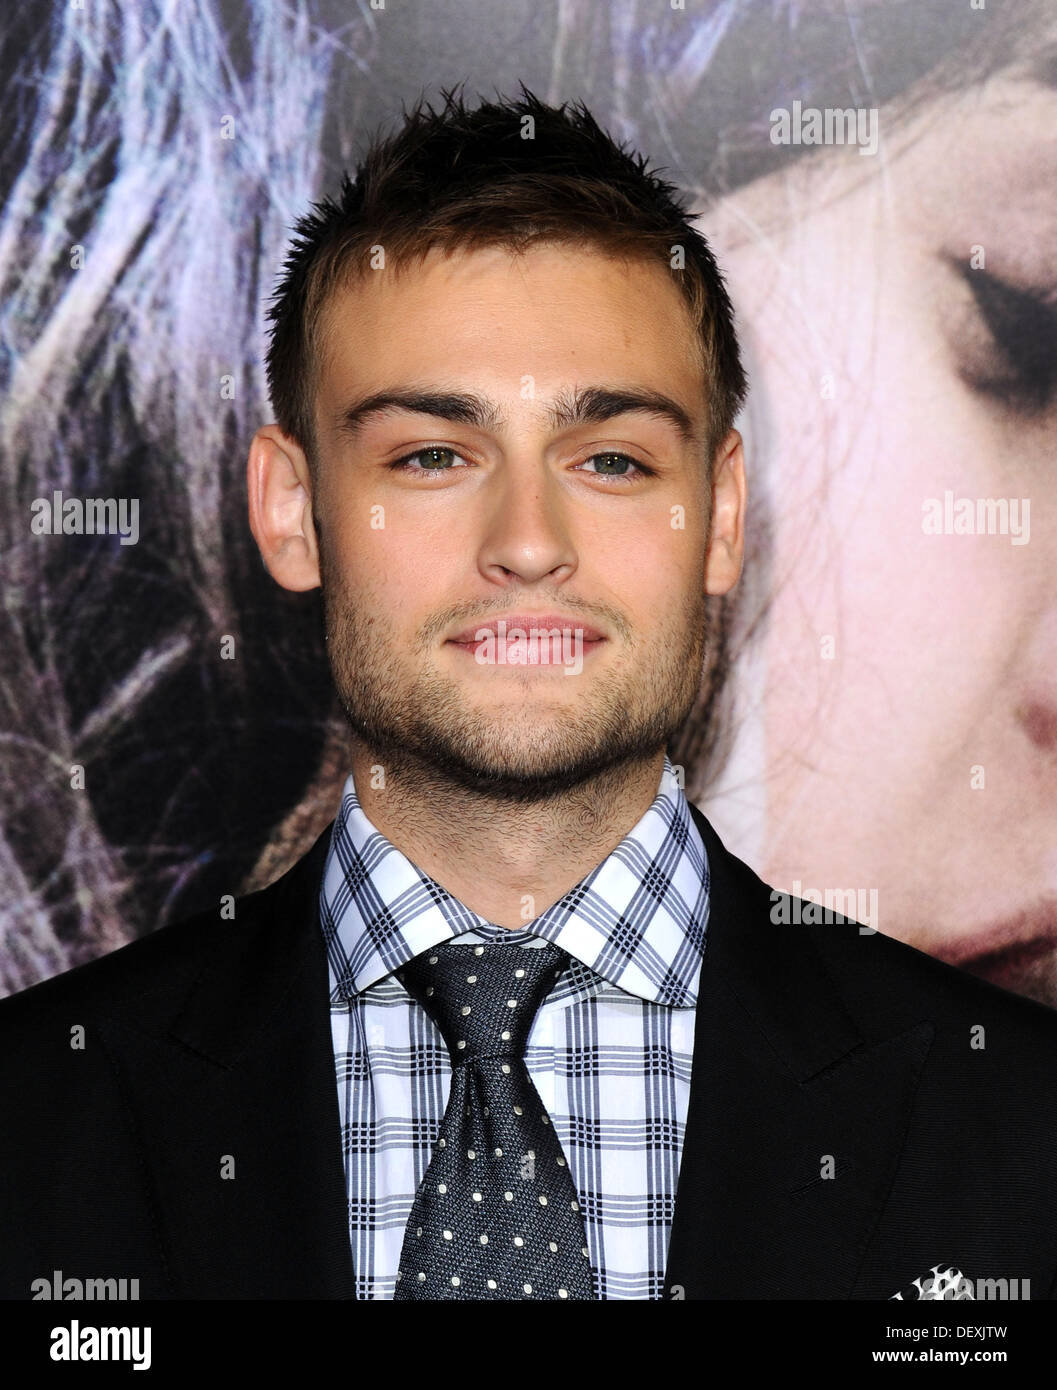 Los Angeles, California, USA. 24th Sep, 2013. Douglas Booth attending the Los Angeles Premiere of ''Romeo & Juliet'' held at the Arclight Theater in Hollywood, California on September 24, 2013. 2013 © D. Long/Globe Photos/ZUMAPRESS.com/Alamy Live News Stock Photo